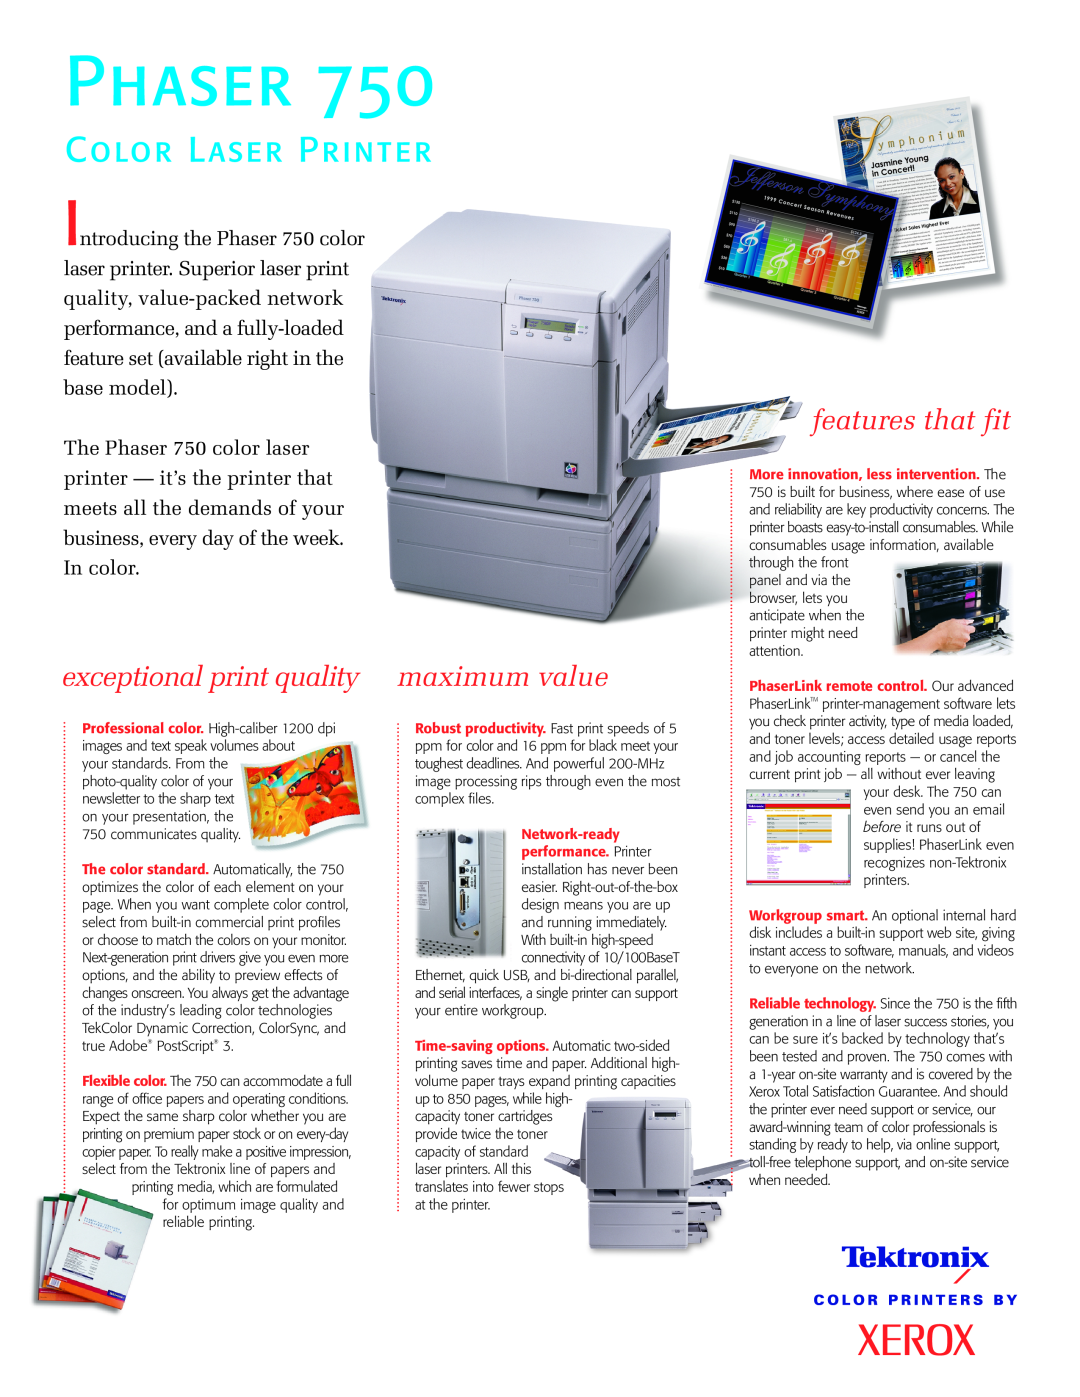 Xerox Phaser 750 software manual features that fit, exceptional print quality, maximum value, C Olor L Aser Printer 